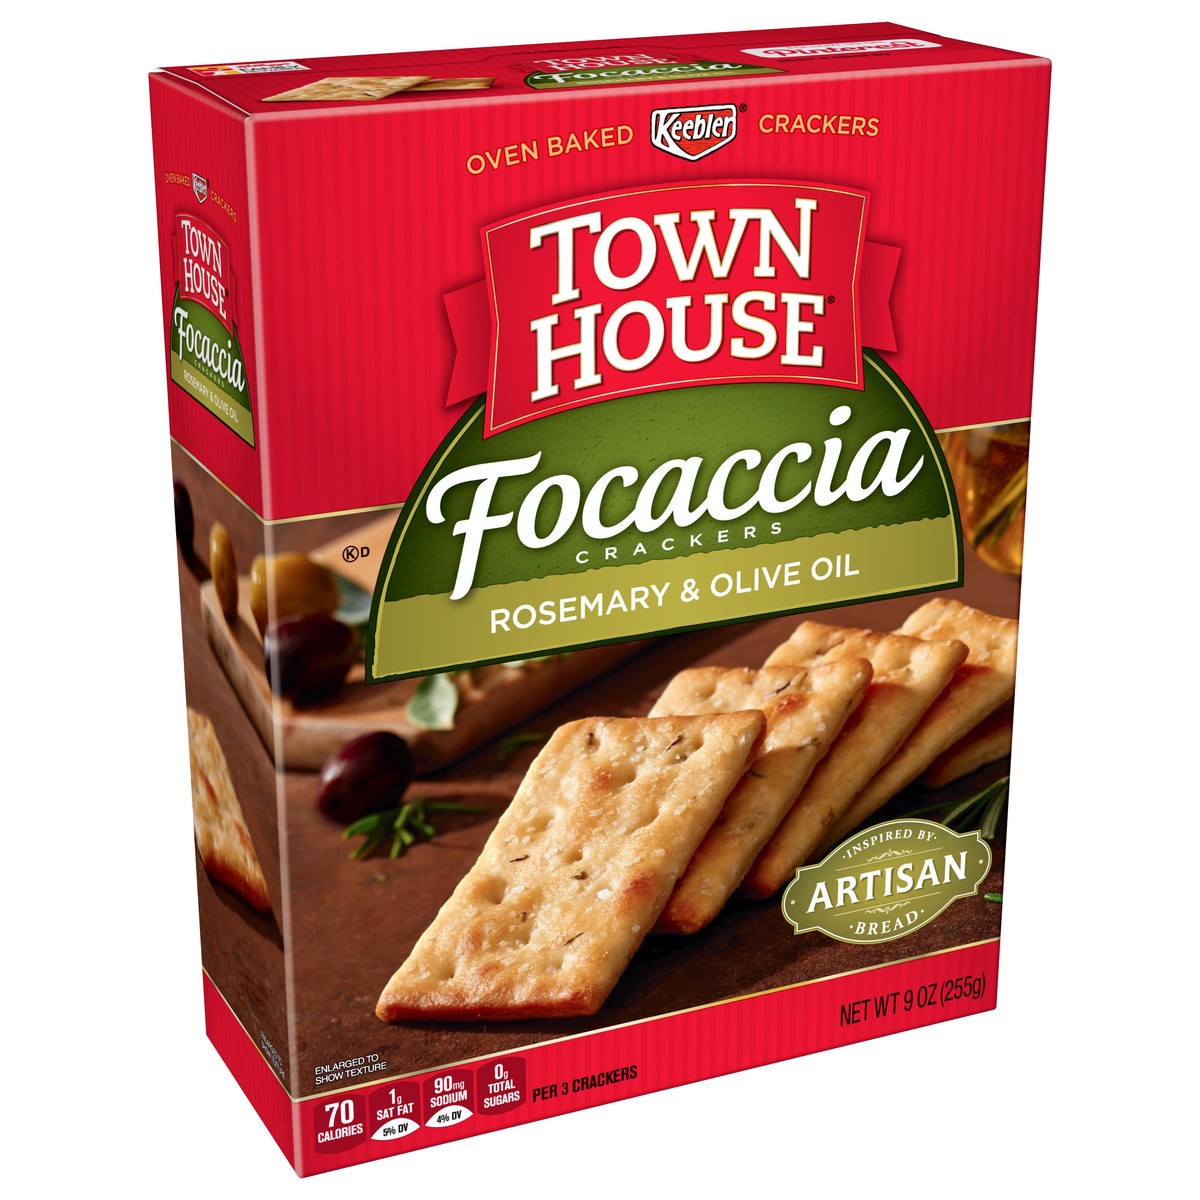 slide 2 of 10, Town House Focaccia Rosemary & Olive Oil Crackers 9 oz, 9 oz